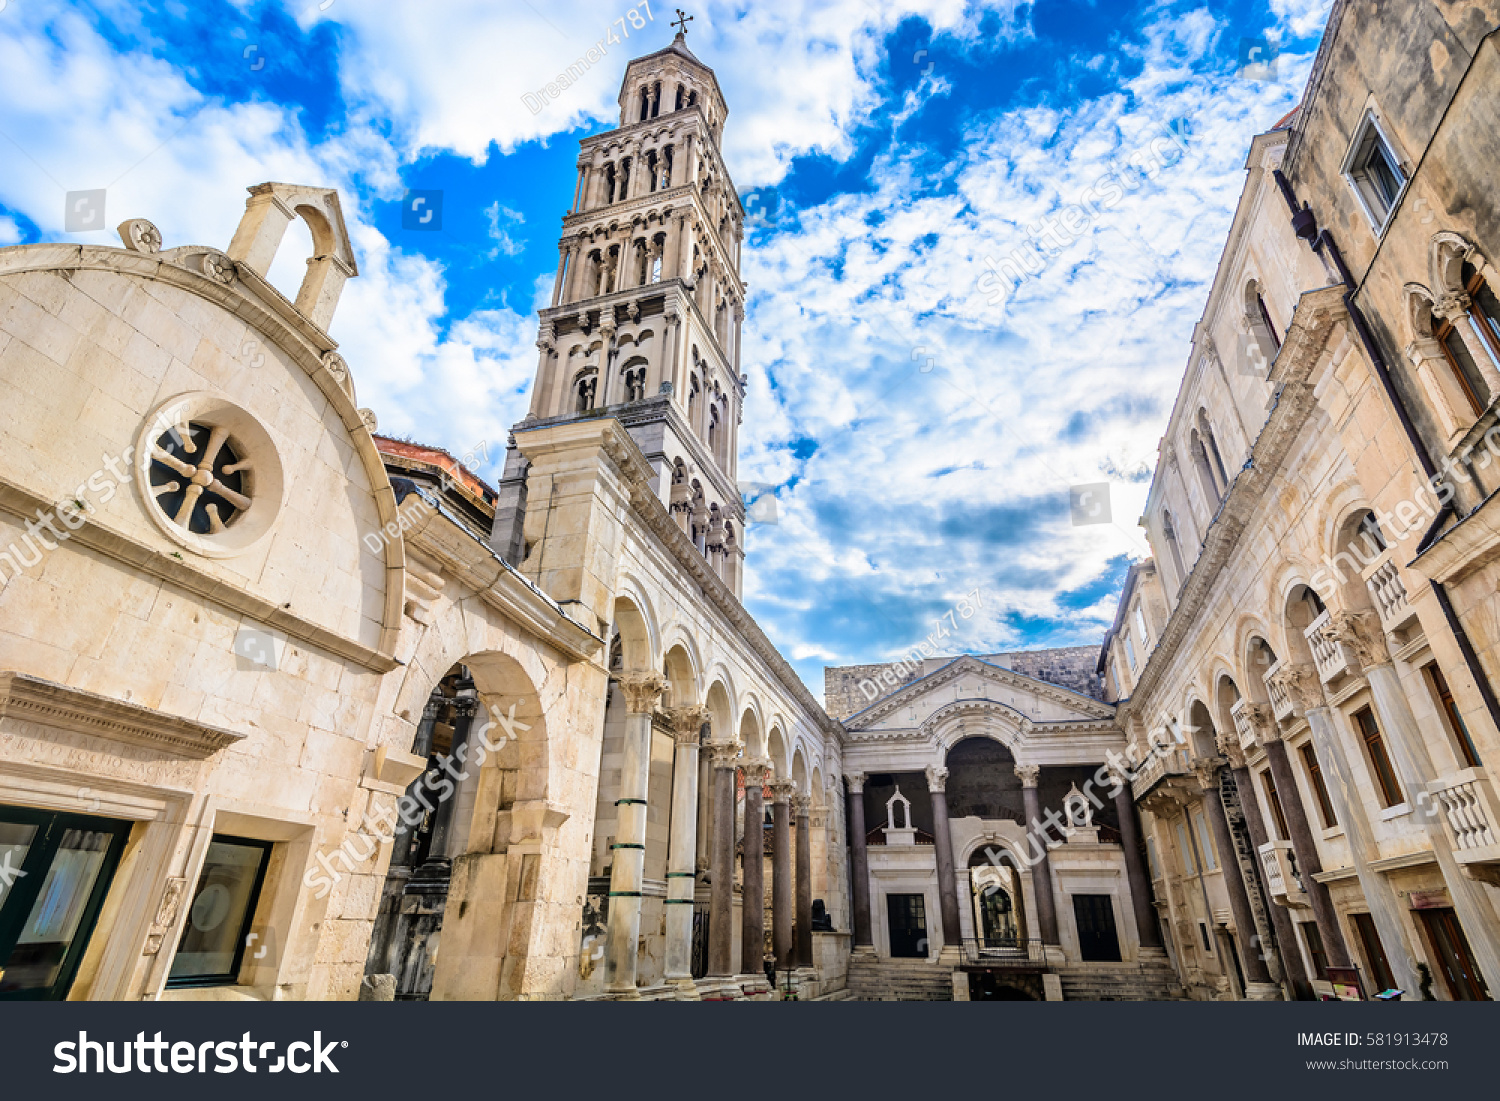 Marble ancient roman architecture in city center of town Split, view at square Peristil in front of cathedral Saint Domnius and  bell tower landmarks, Croatia. / Selective focus. #581913478